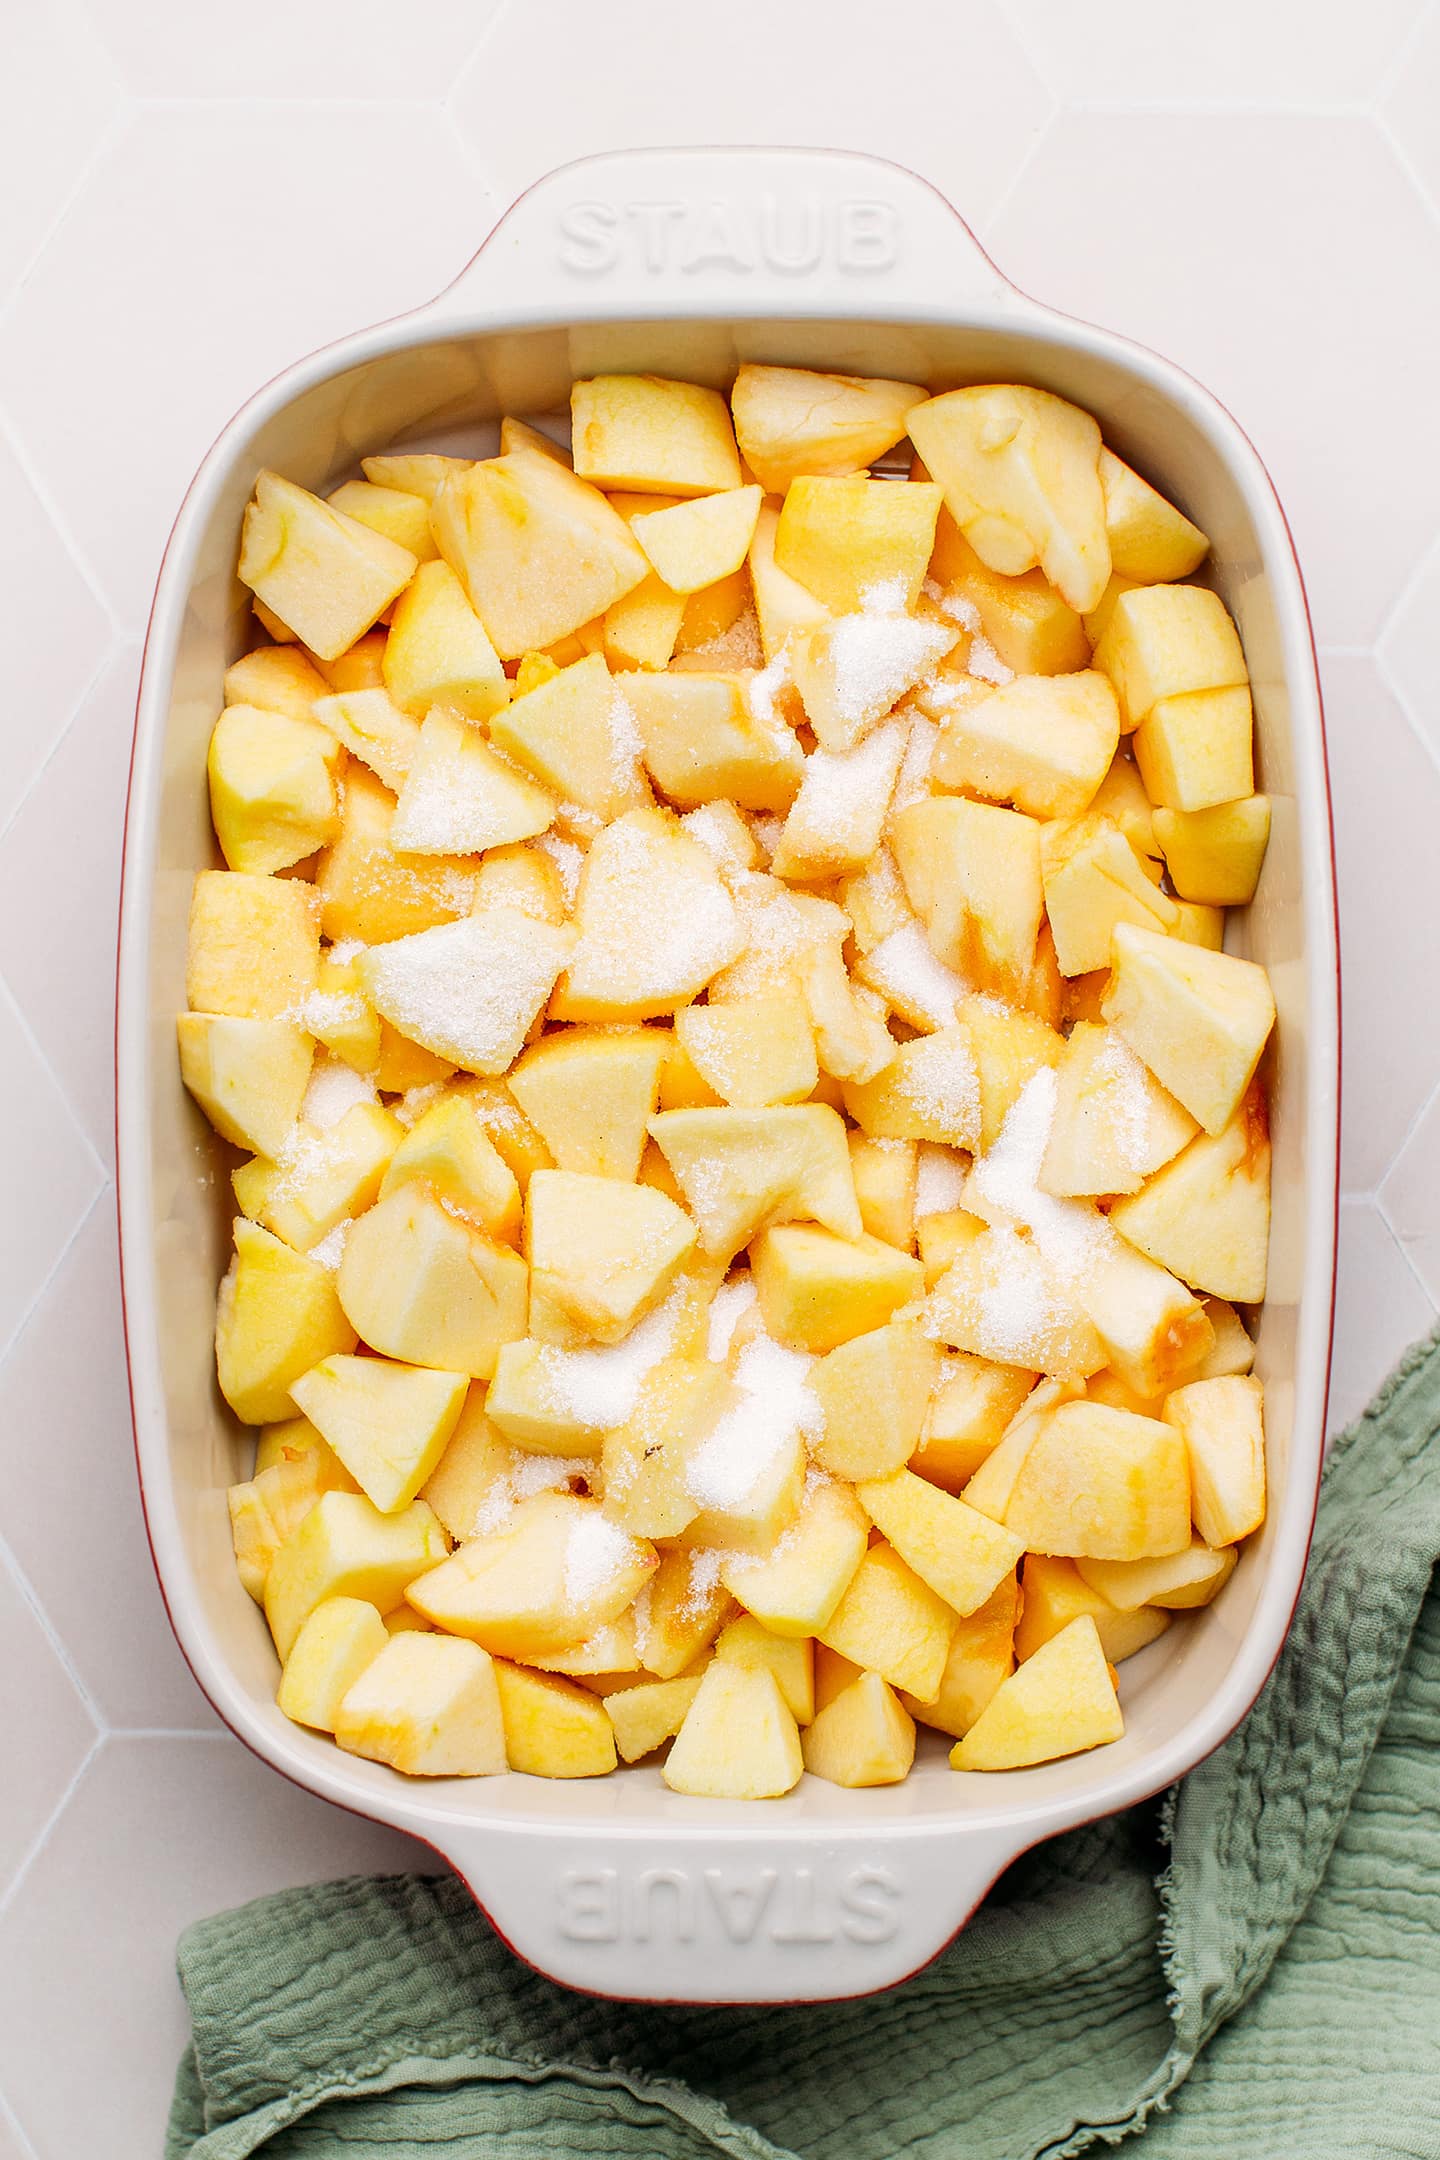 Diced apples in a baking dish.